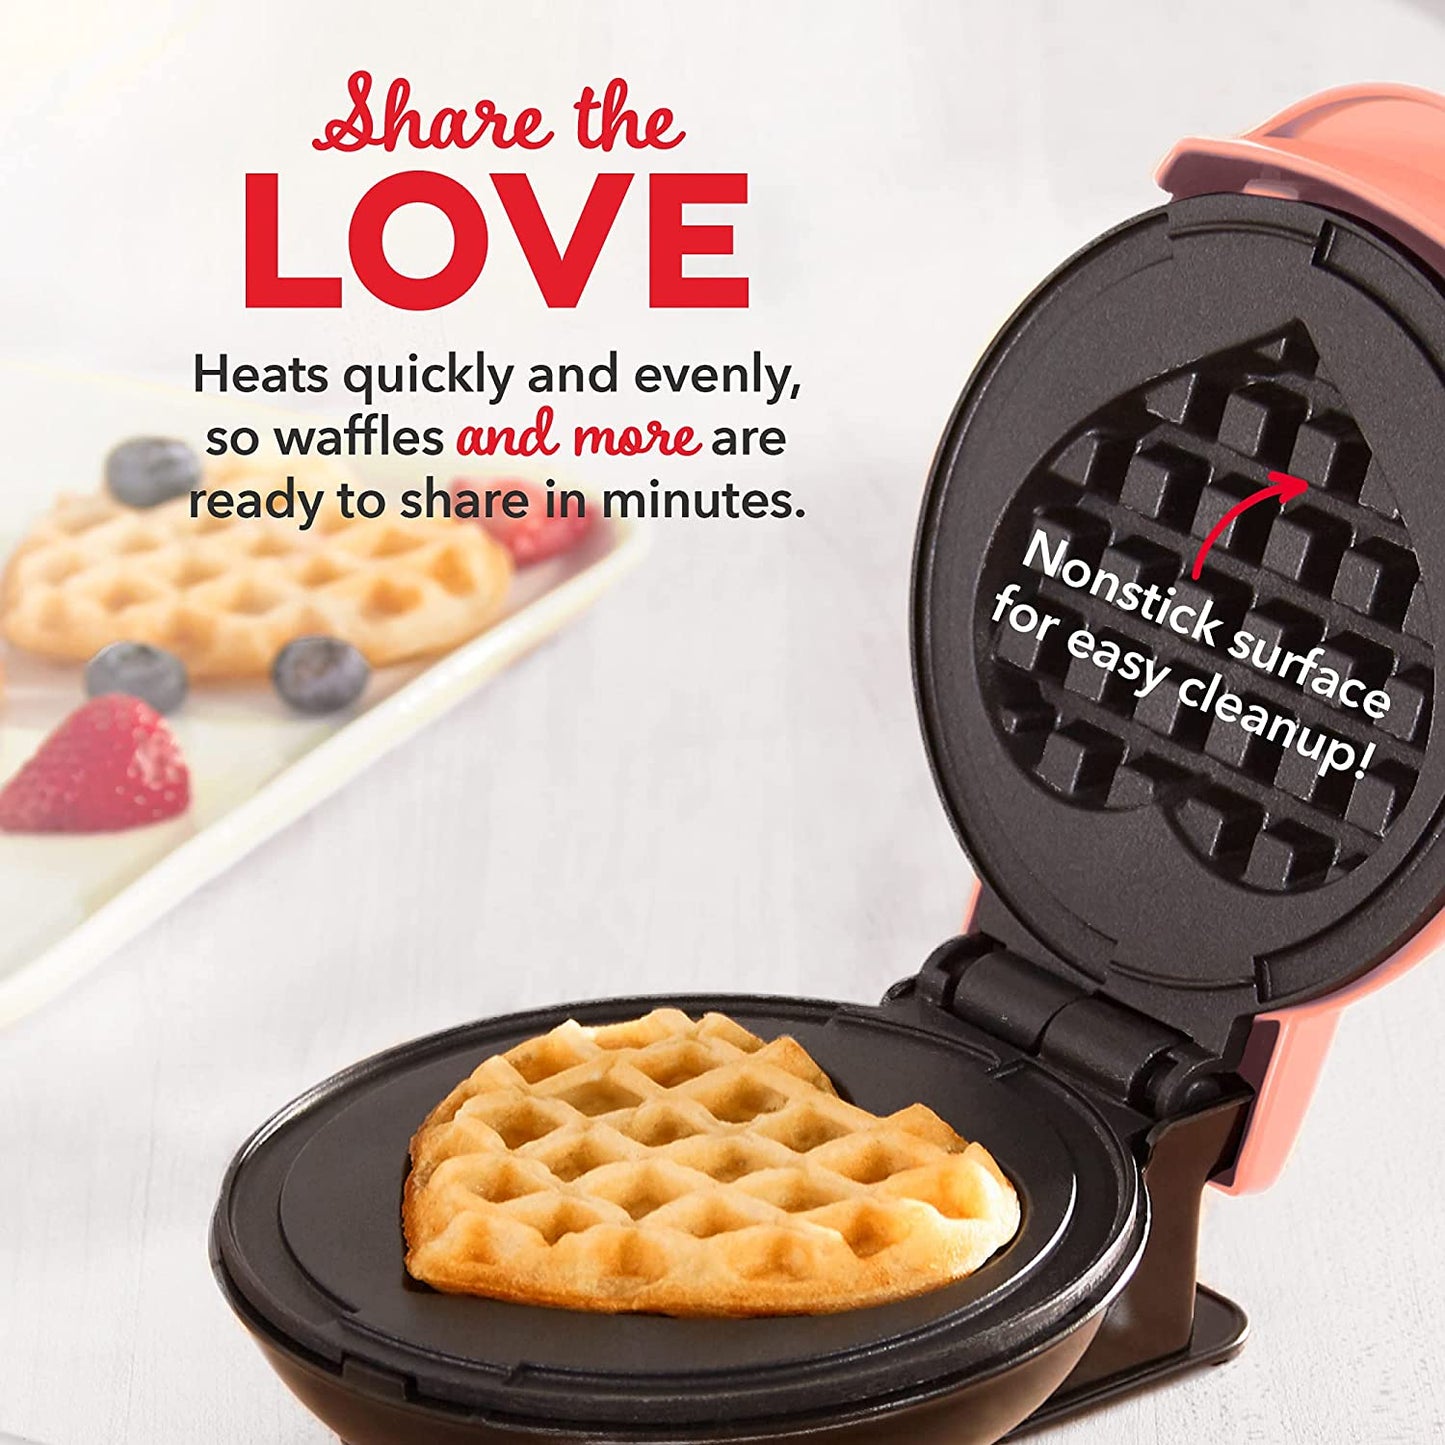 "Breakfast Bliss: Mini Maker 3-Pack Gift Set with Waffle Maker, Heart-Shaped Waffle Maker, and Griddle"